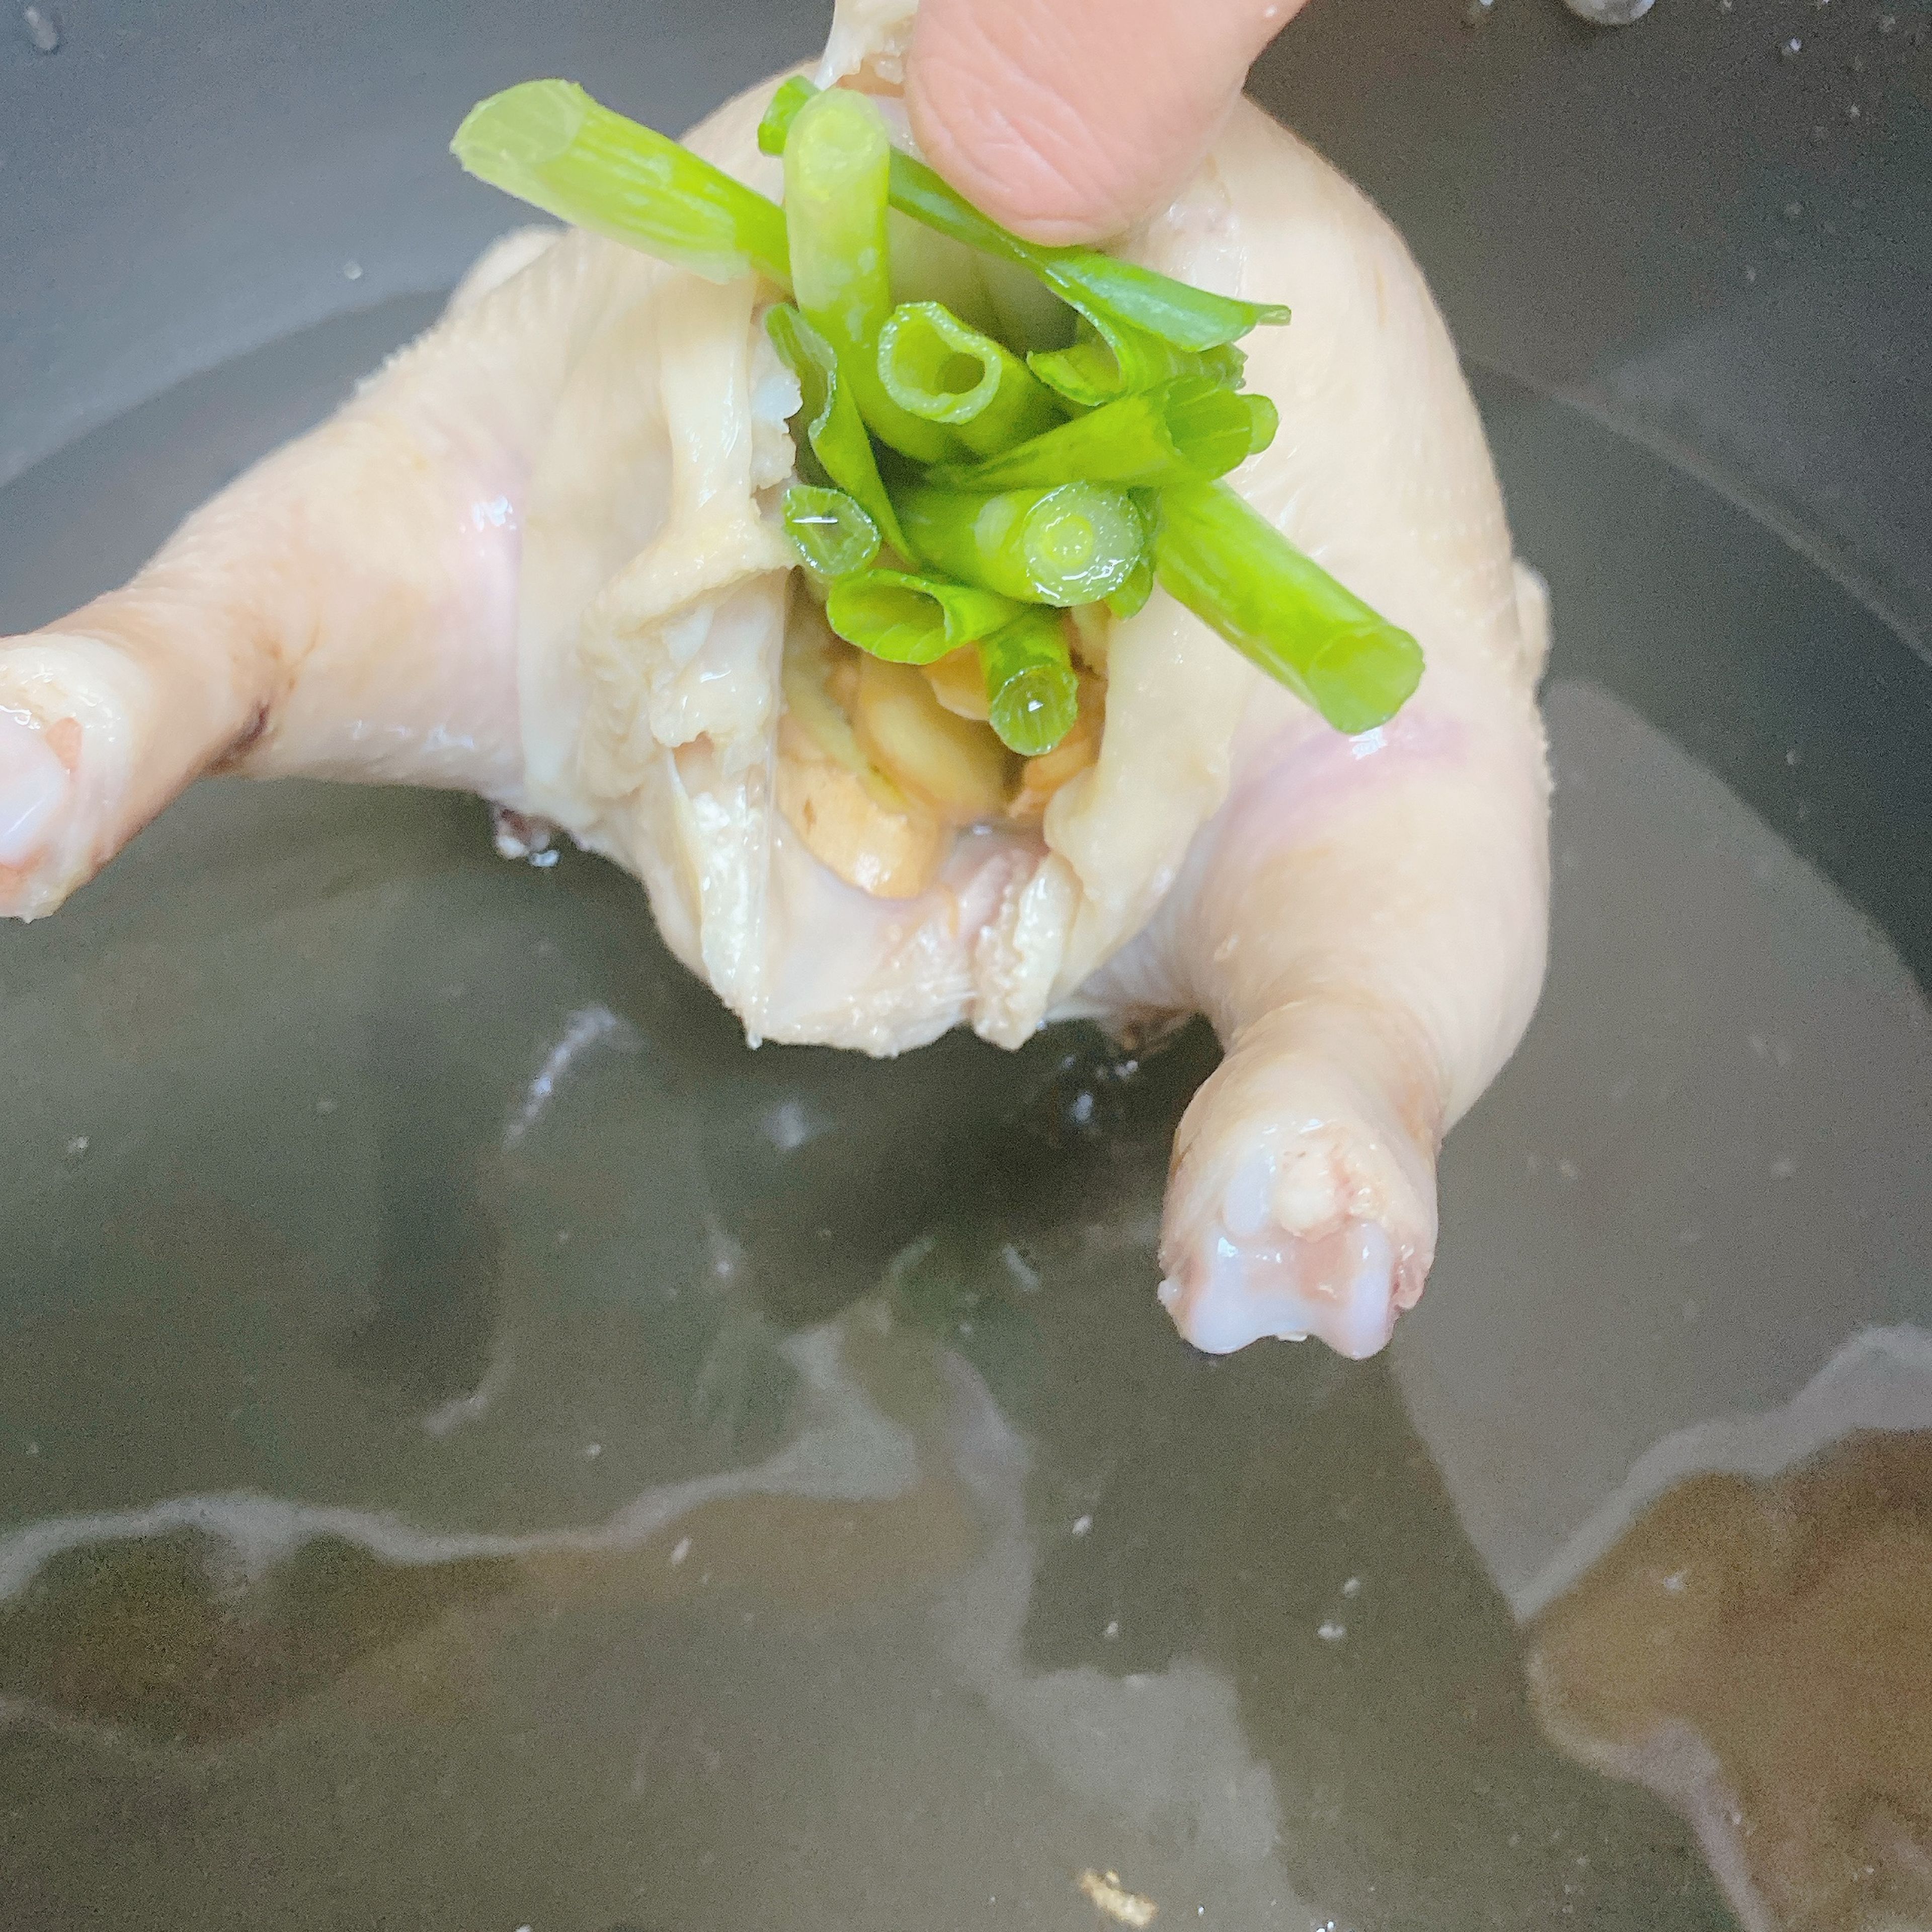 Blanch the chicken to get rid of the blood. You can add some cooking wine. While waiting, julienne the scallions and slice the ginger. Once the chicken is cleaned, give it a short message with the salt-just a little bit is enough. Then... emmm... stuff the chicken with as much ginger and scallion as possible as the picture shows.